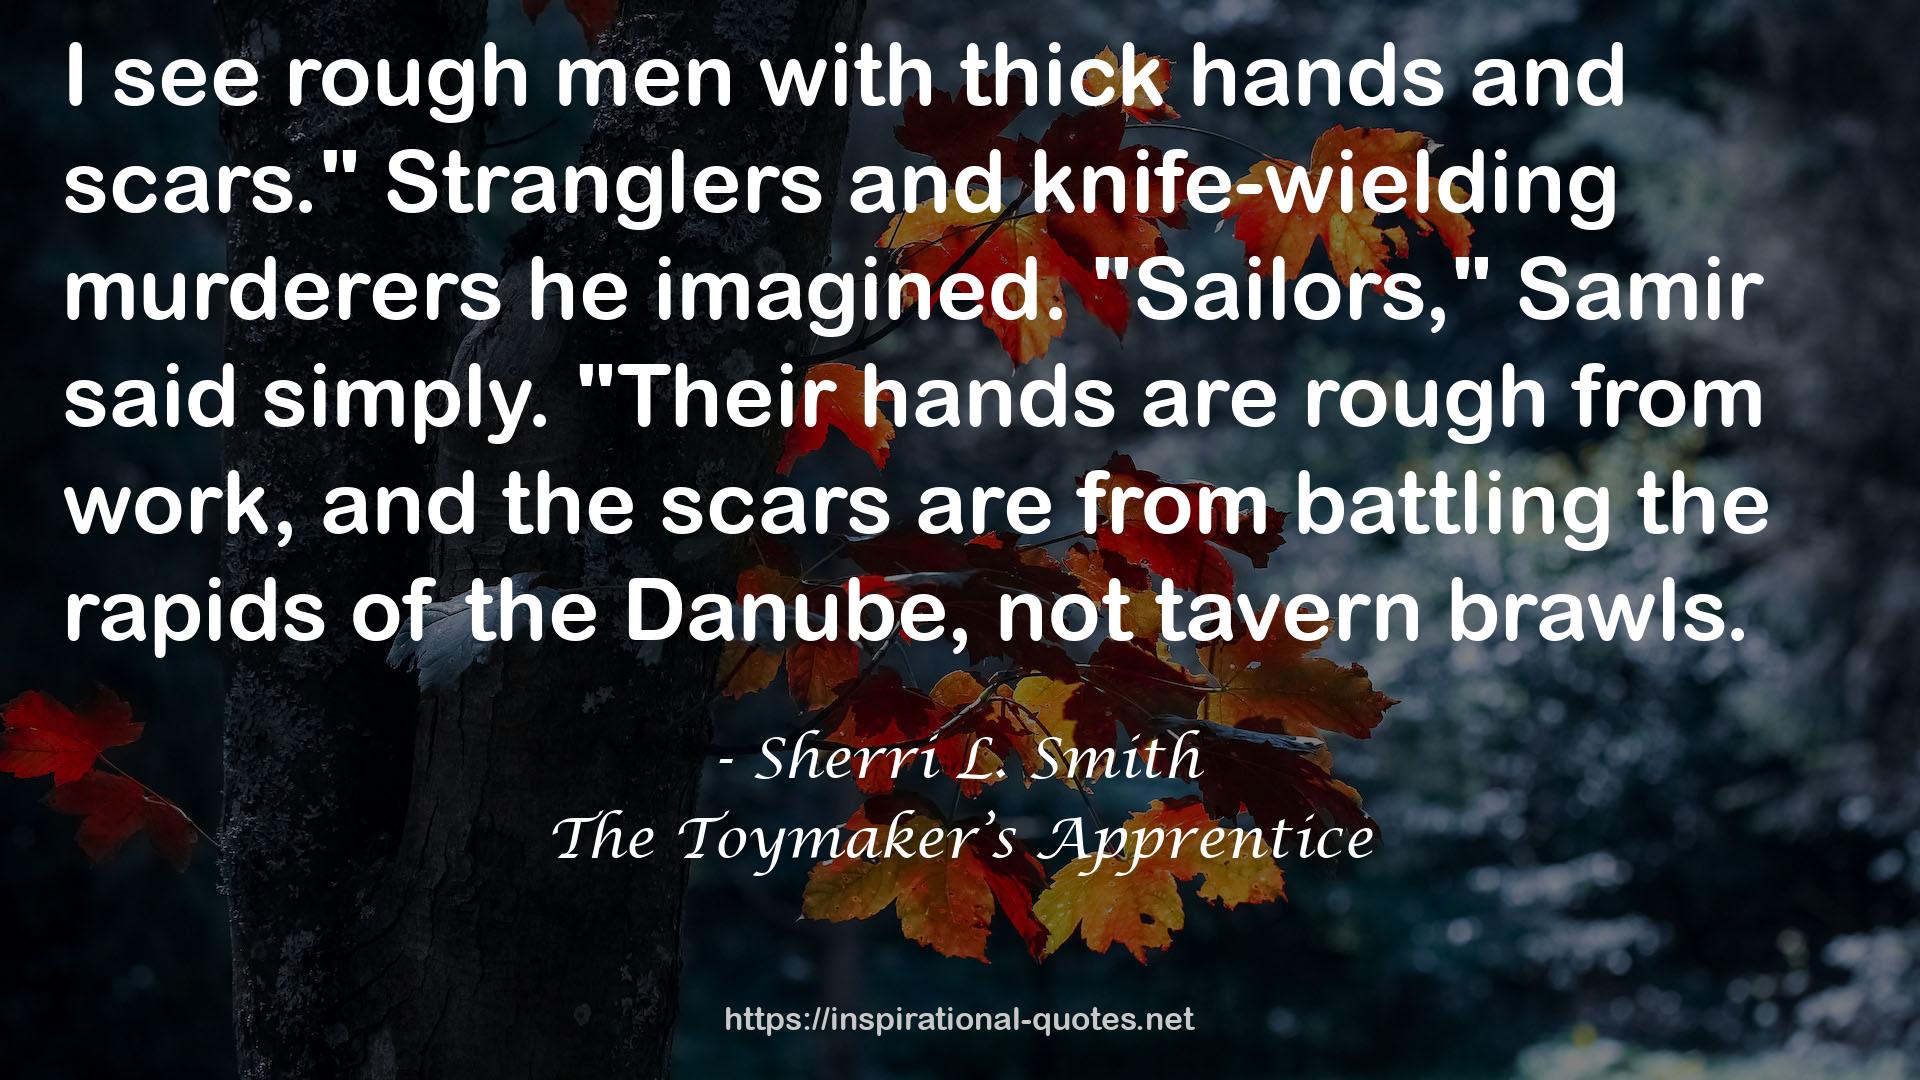 The Toymaker’s Apprentice QUOTES